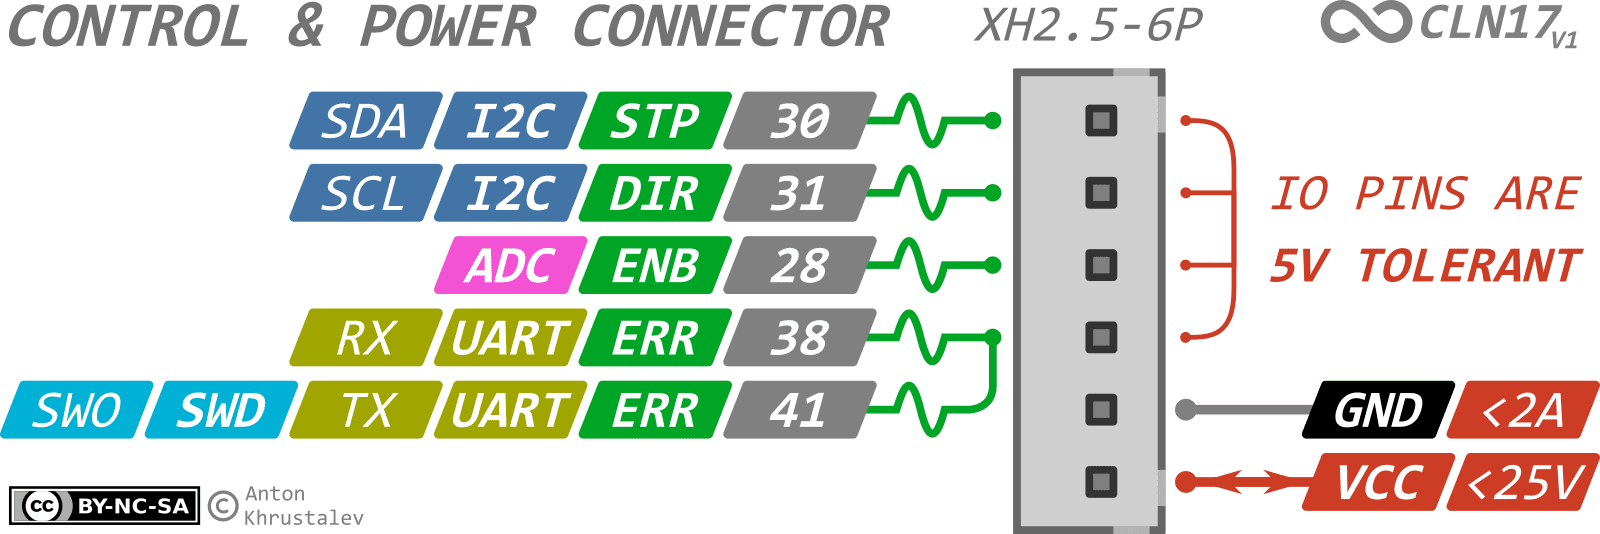 Control Connector Pinout